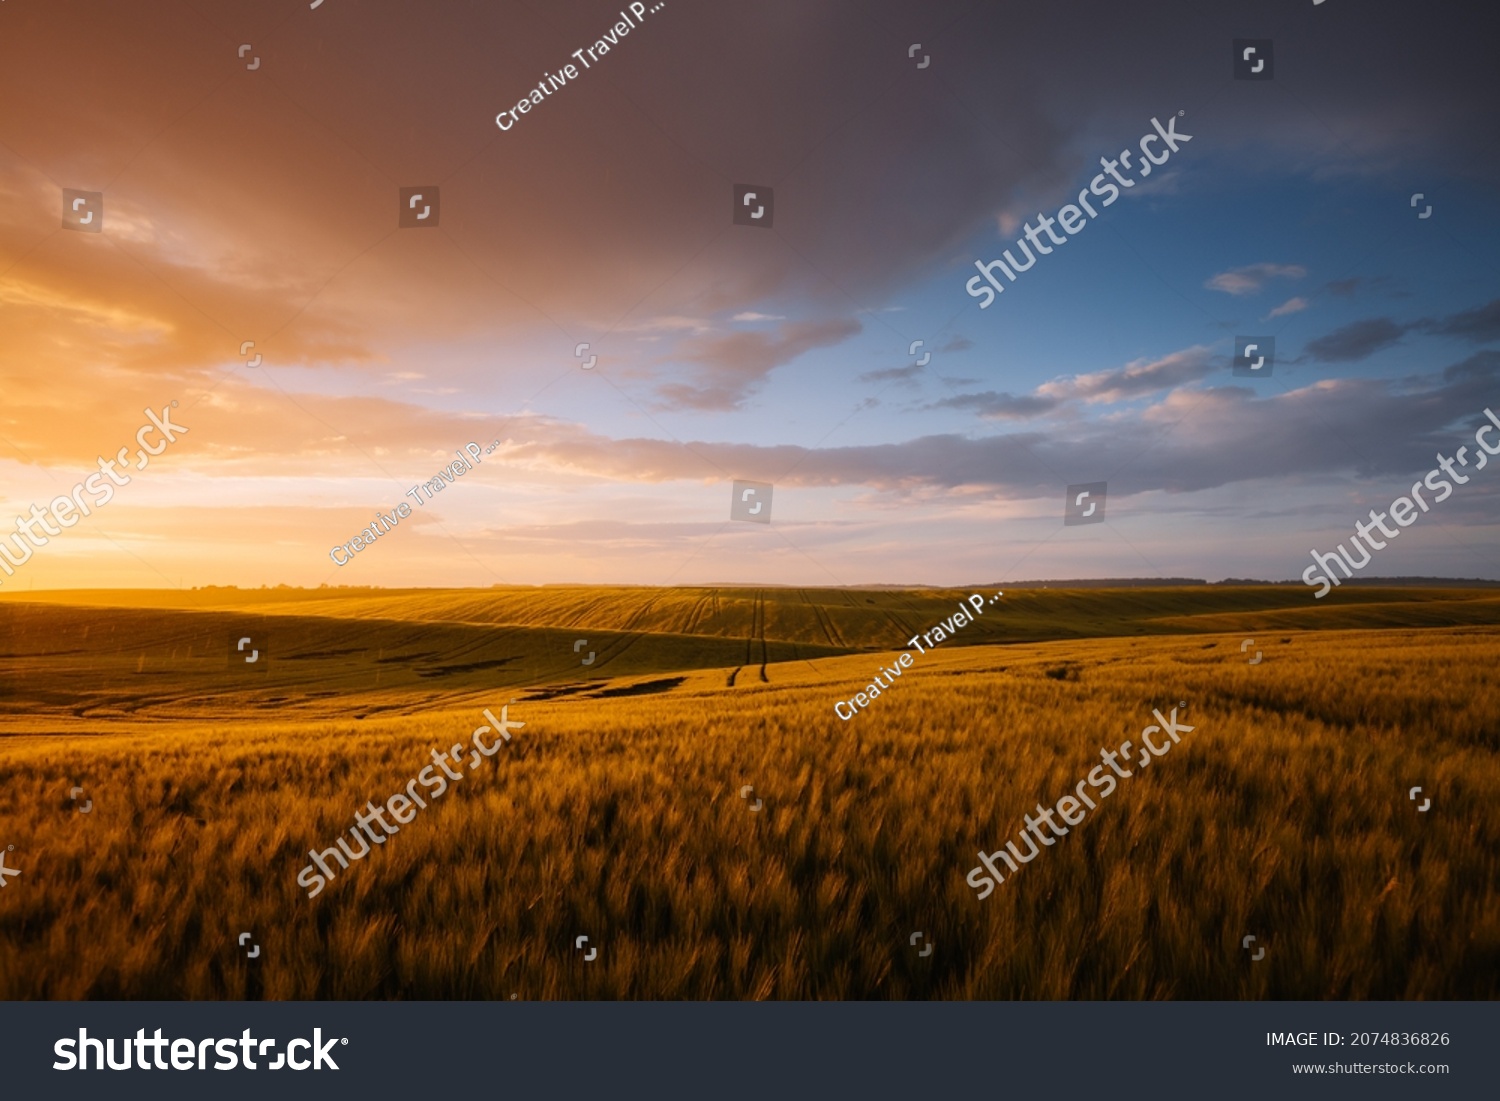 Splendid scene of agricultural land in the sunlight in the evening. Location place of Ukrainian agrarian region, Europe. Scenic image of dramatic light. Perfect natural wallpaper. Beauty of earth. #2074836826